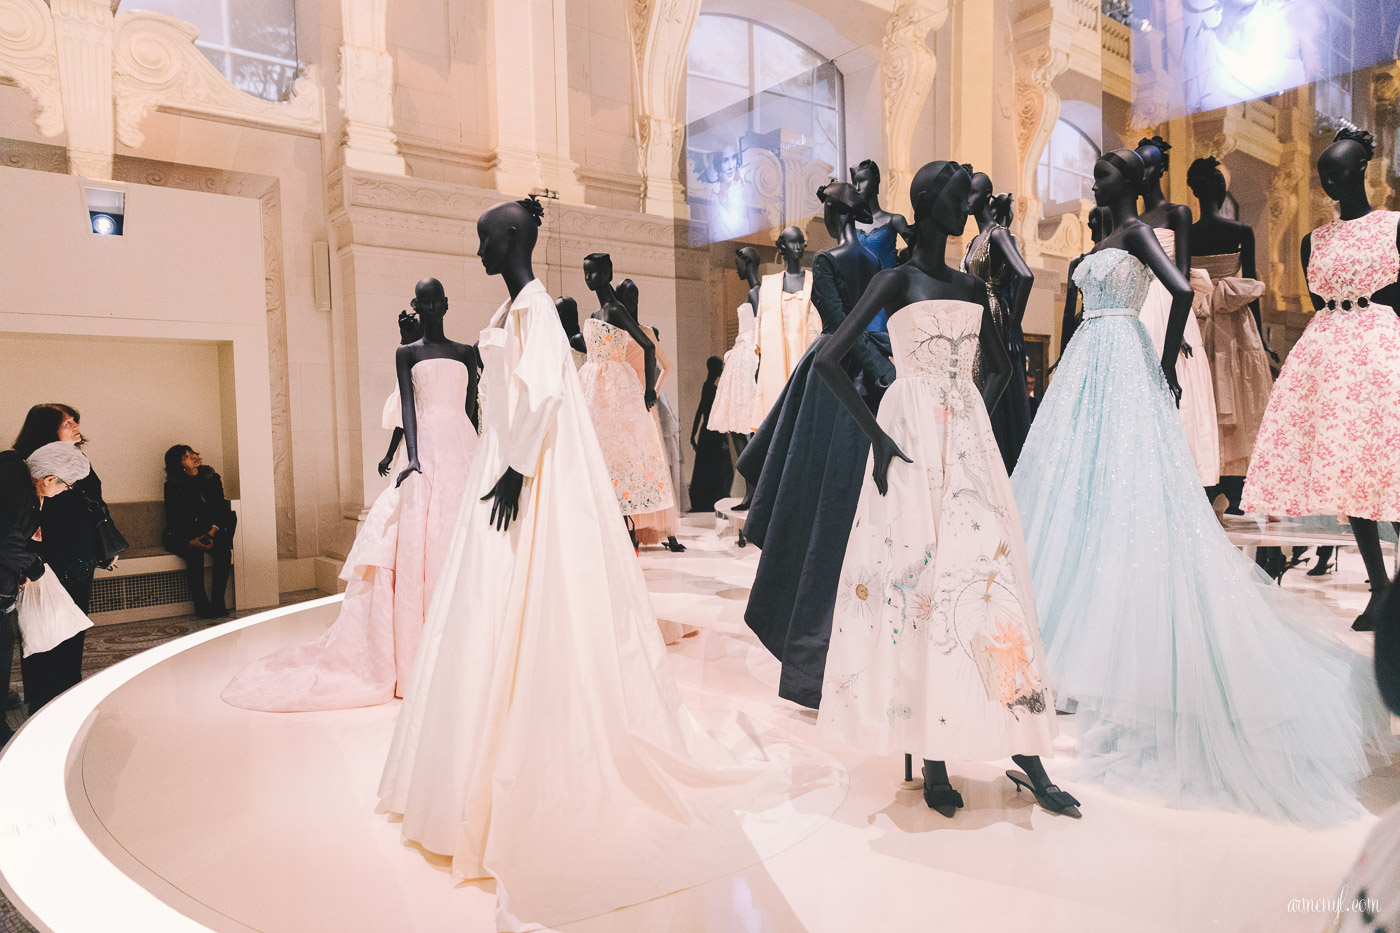 The Christian Dior, couturier du rêve - Exhibition in Paris Photography by Armenyl